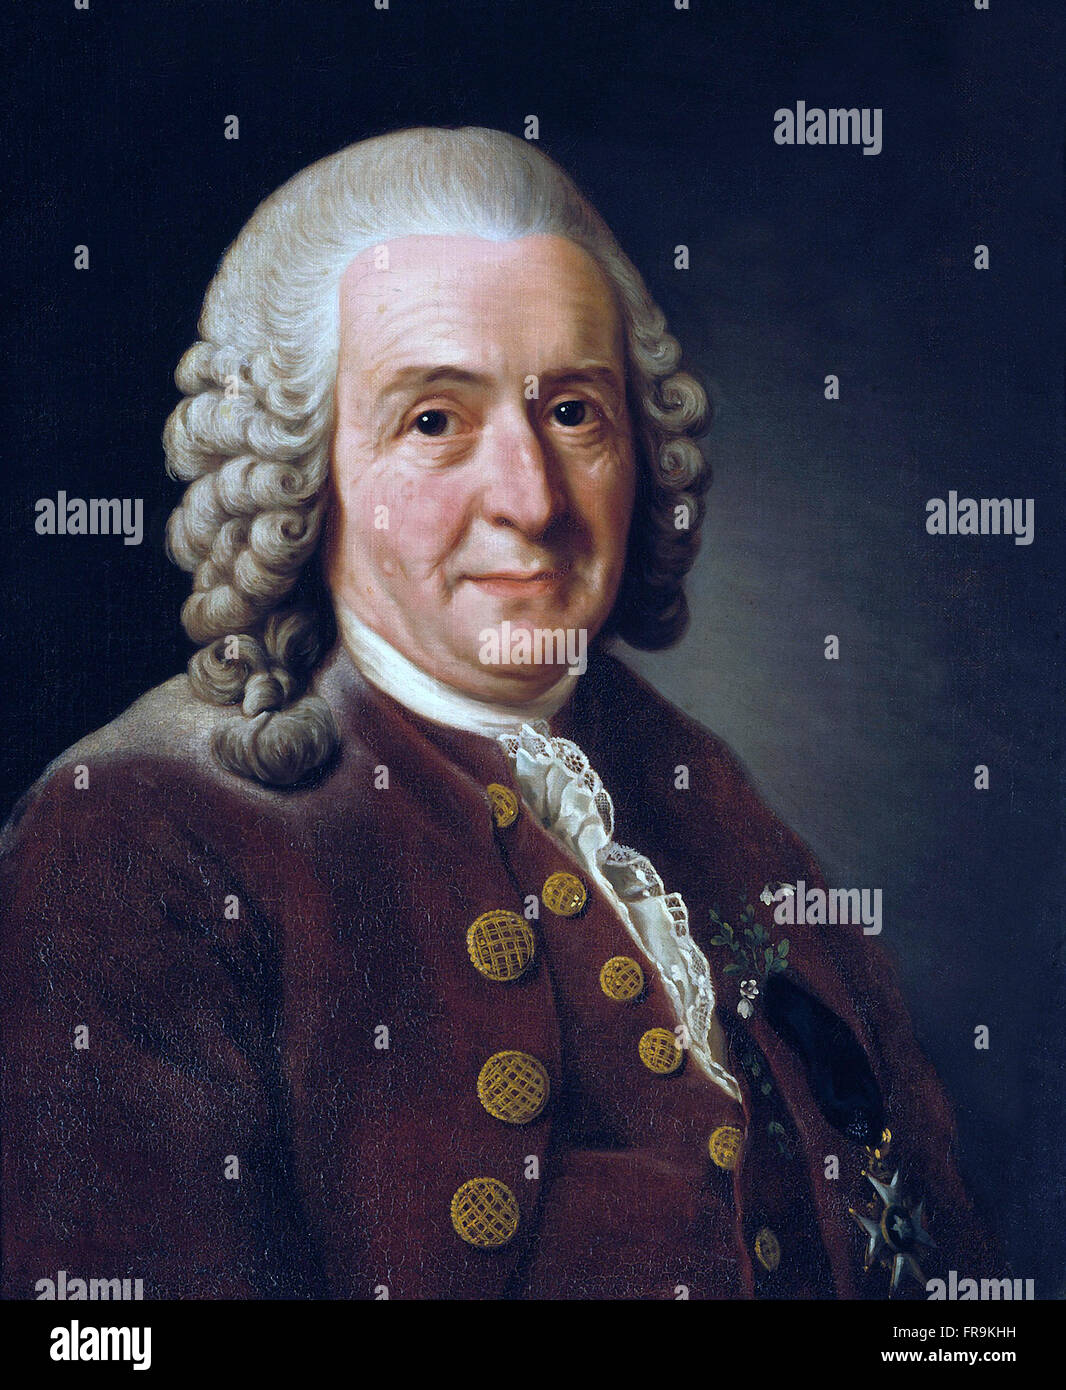 A 1610 portrait of Carl von Linné by Alexander Roslin in 1775, oil on canvas.  Carl Linnaeus (1707 – 10 January 1778), also known after his ennoblement as Carl von Linné was a Swedish botanist, physician, and zoologist, who formalised the modern system of naming organisms called binomial nomenclature. He is known by the epithet 'father of modern taxonomy' Stock Photo